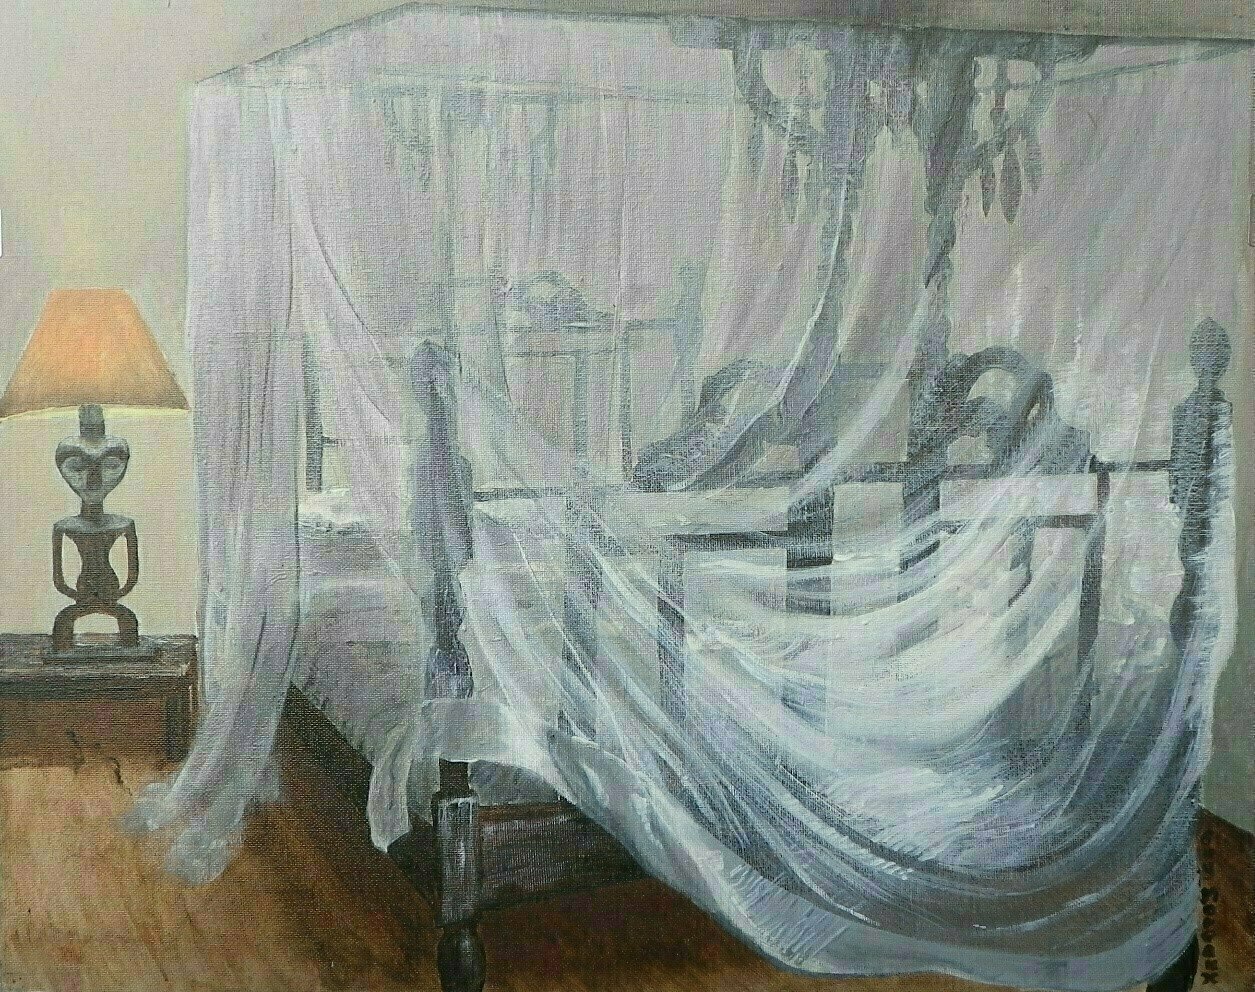 Guy Octaaf Moreaux; Diani Morning, 2019, Original Painting Acrylic, 50 x 40 cm. Artwork description: 241 Diani, on the Kenian coast, is a beachtown.  The atmosphere with the swahili style bed with a mosquitonet, will bring memories up for those who have spent time there.  Acrylic paint on canvasboard. ...